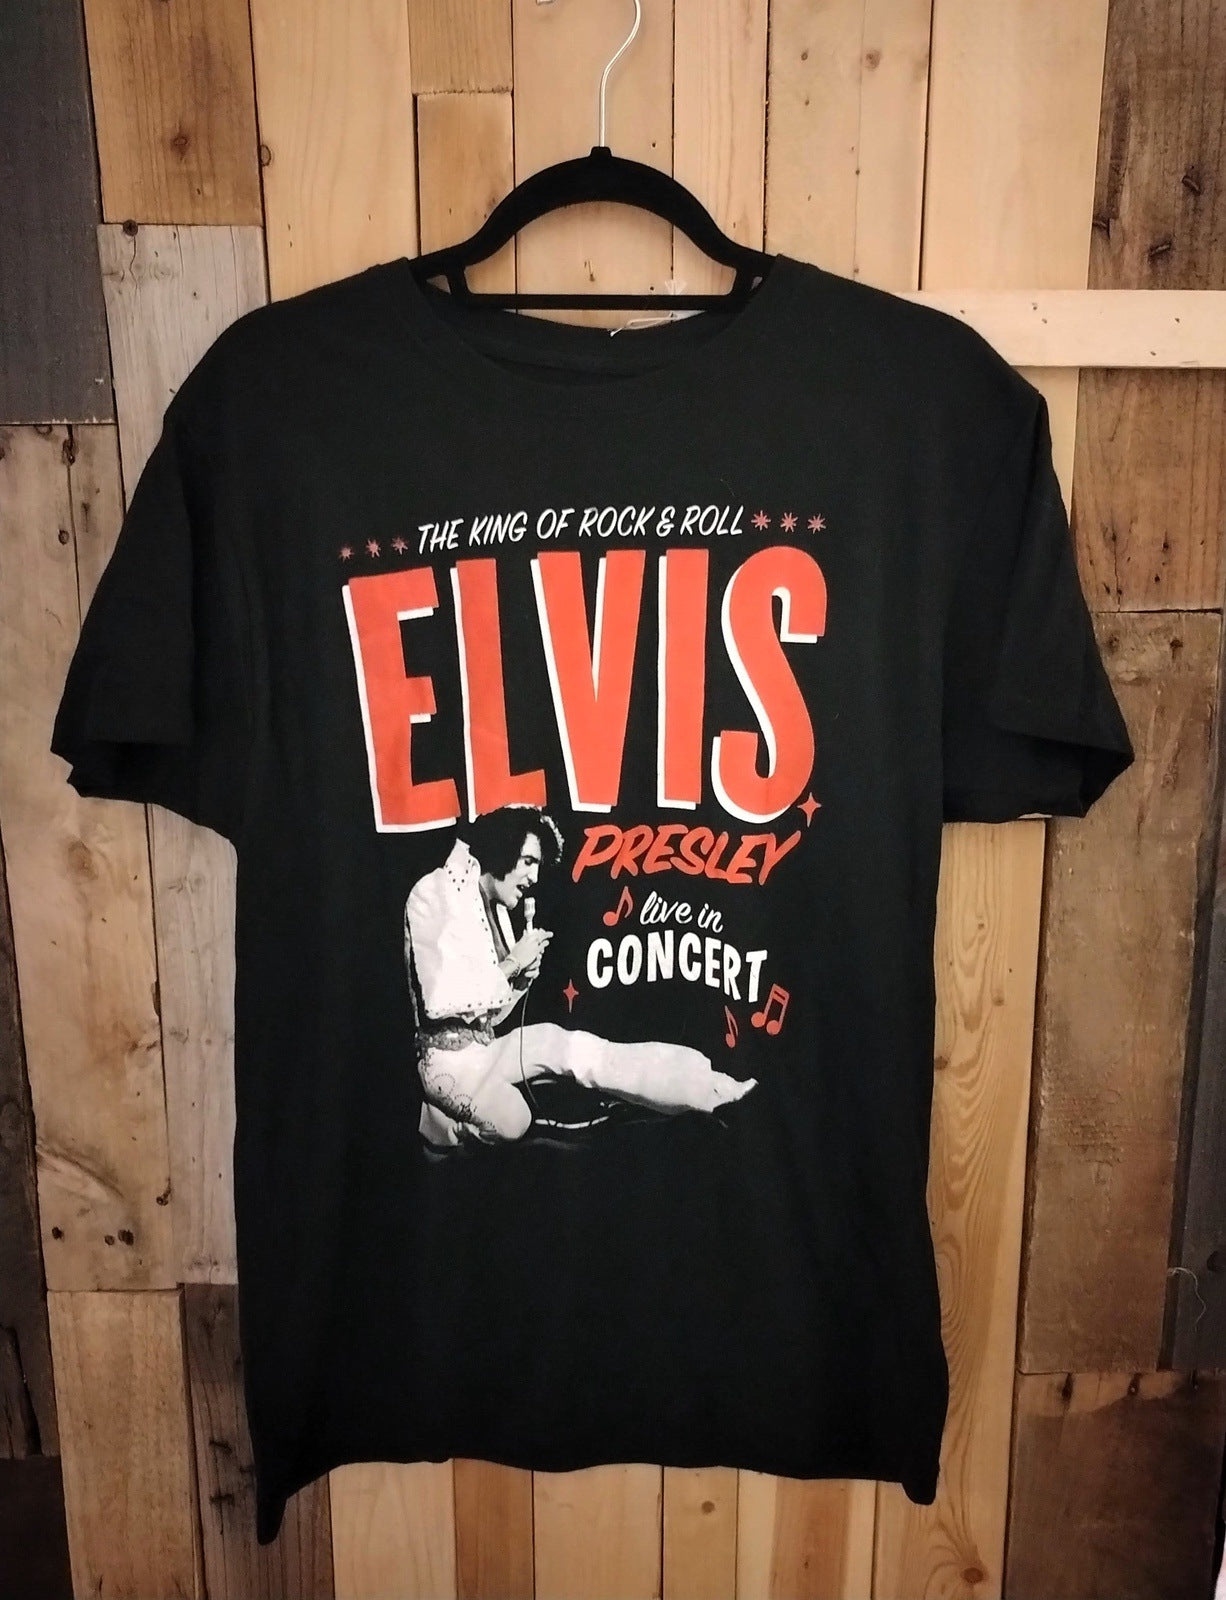 Elvis Presley Official Merchandise T Shirt Size Medium New with Tag